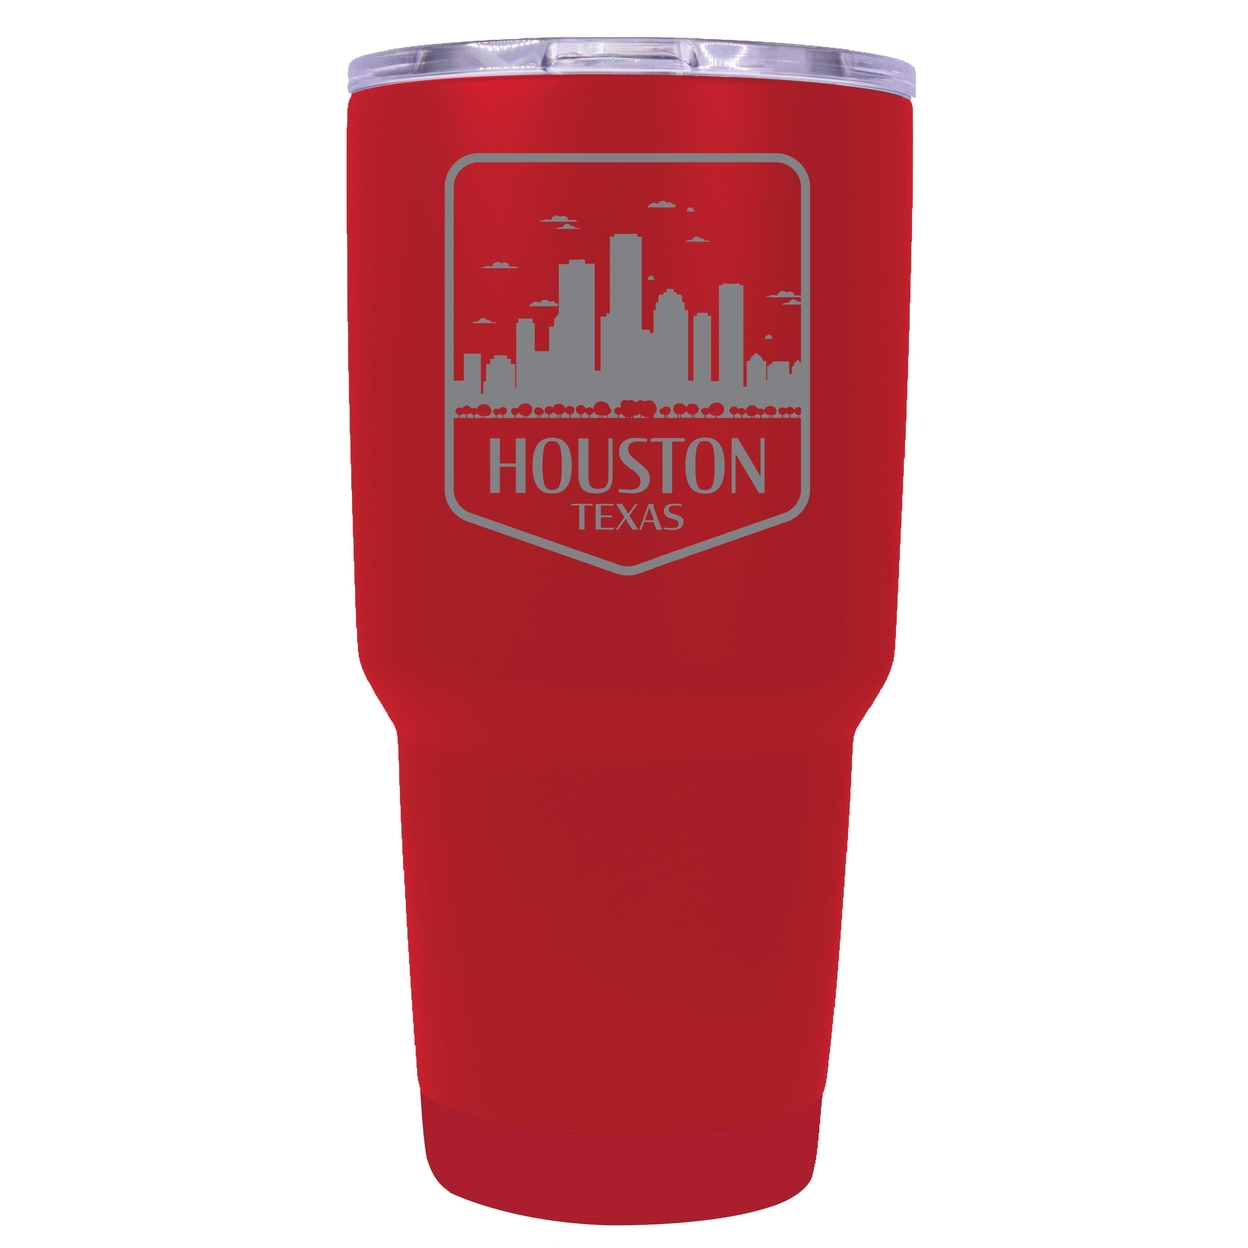 Houston Texas Souvenir 24 Oz Engraved Insulated Stainless Steel Tumbler - Red,,2-Pack